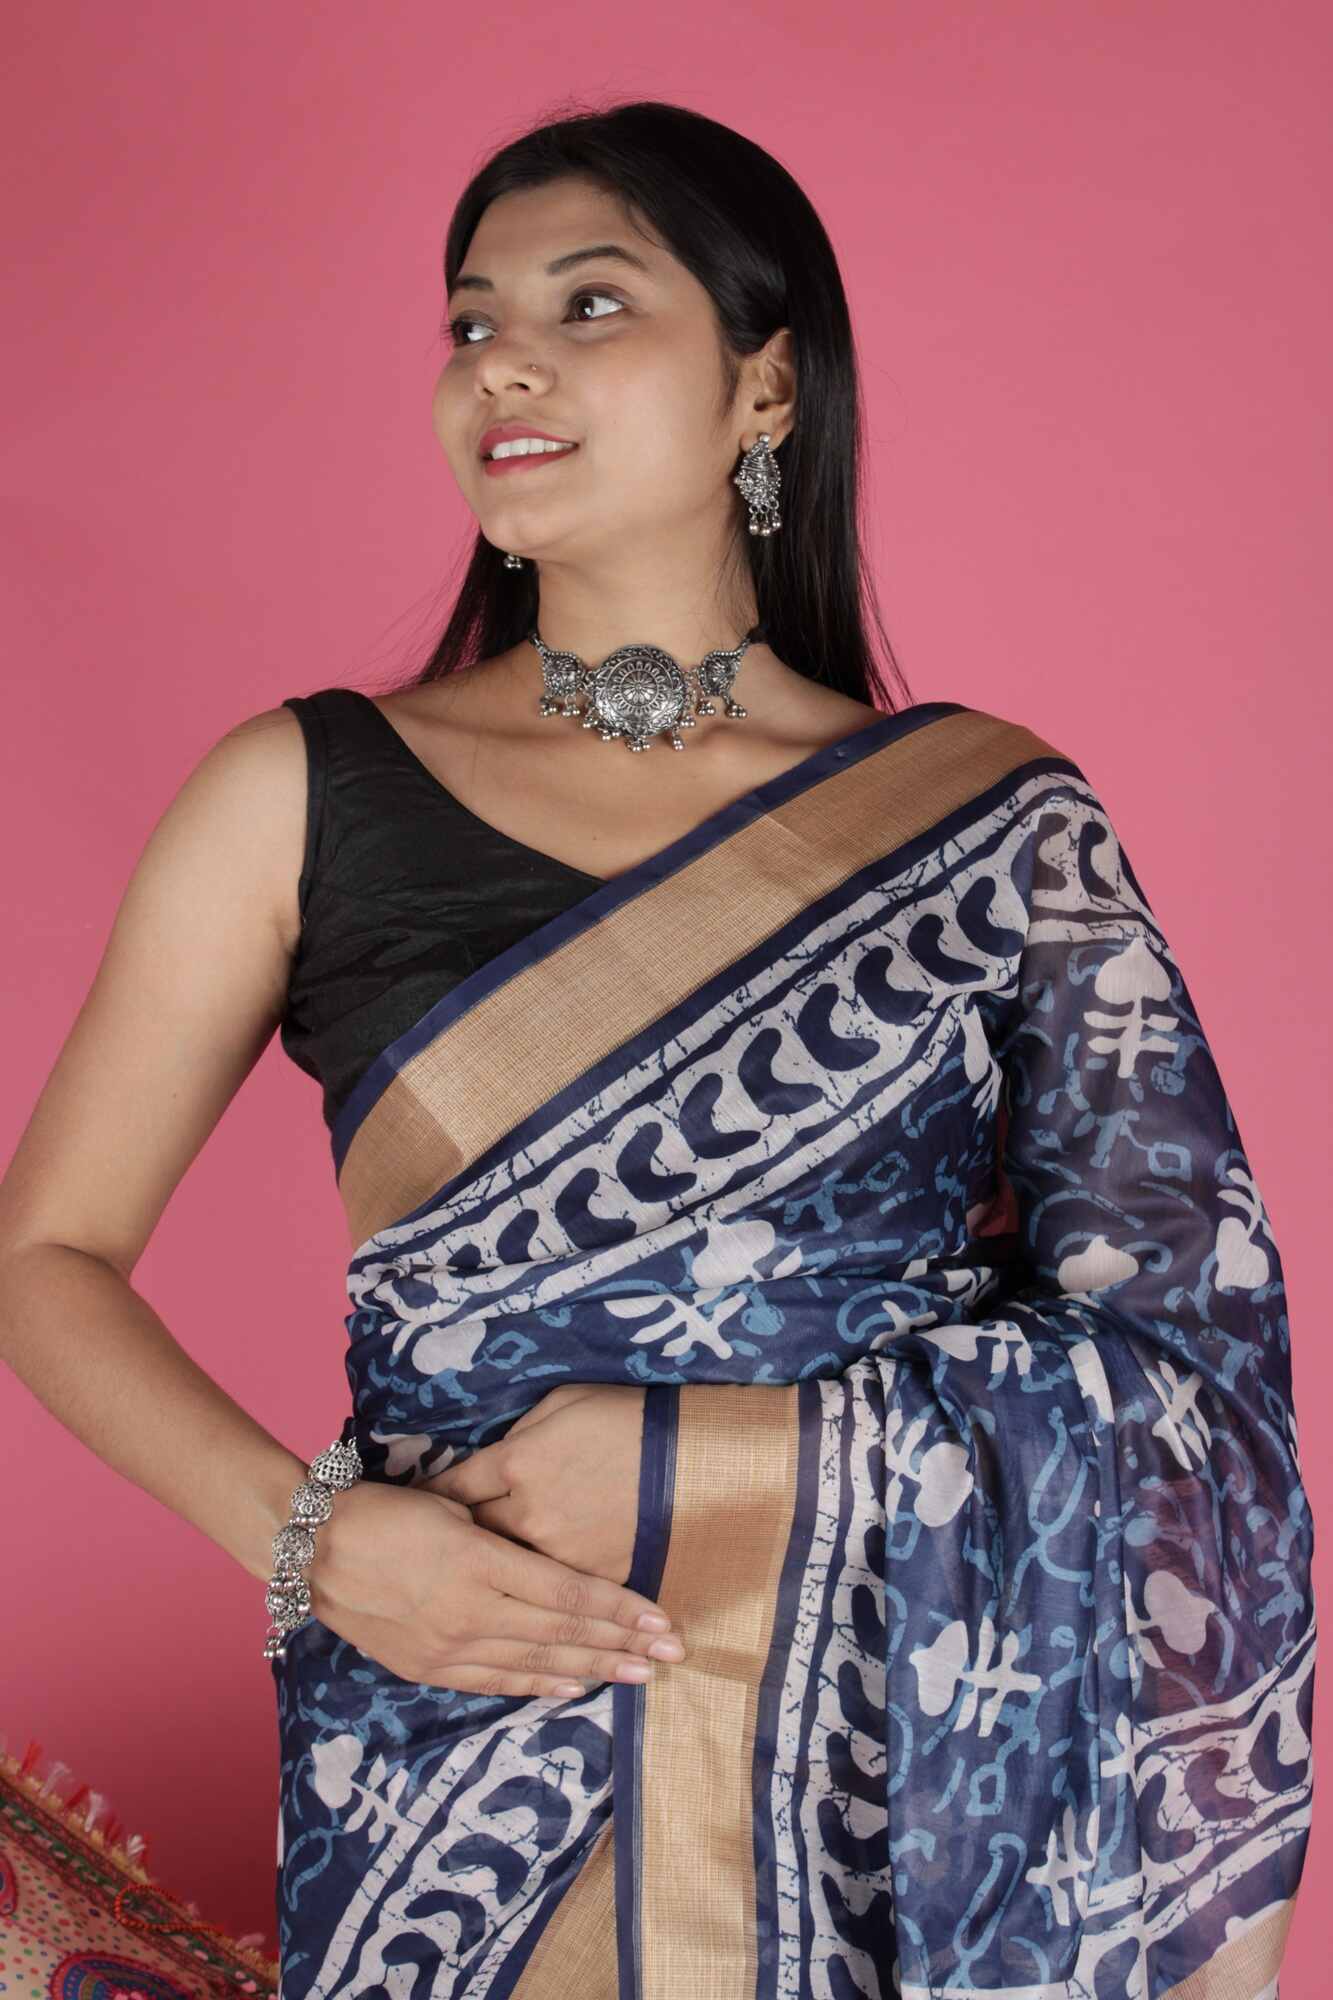 Indigo Chanderi soft cotton With Weaving Golden Border Digital Printed Wrap in 1 Minute Saree With Readymade Blouse - Isadora Life Online Shopping Store